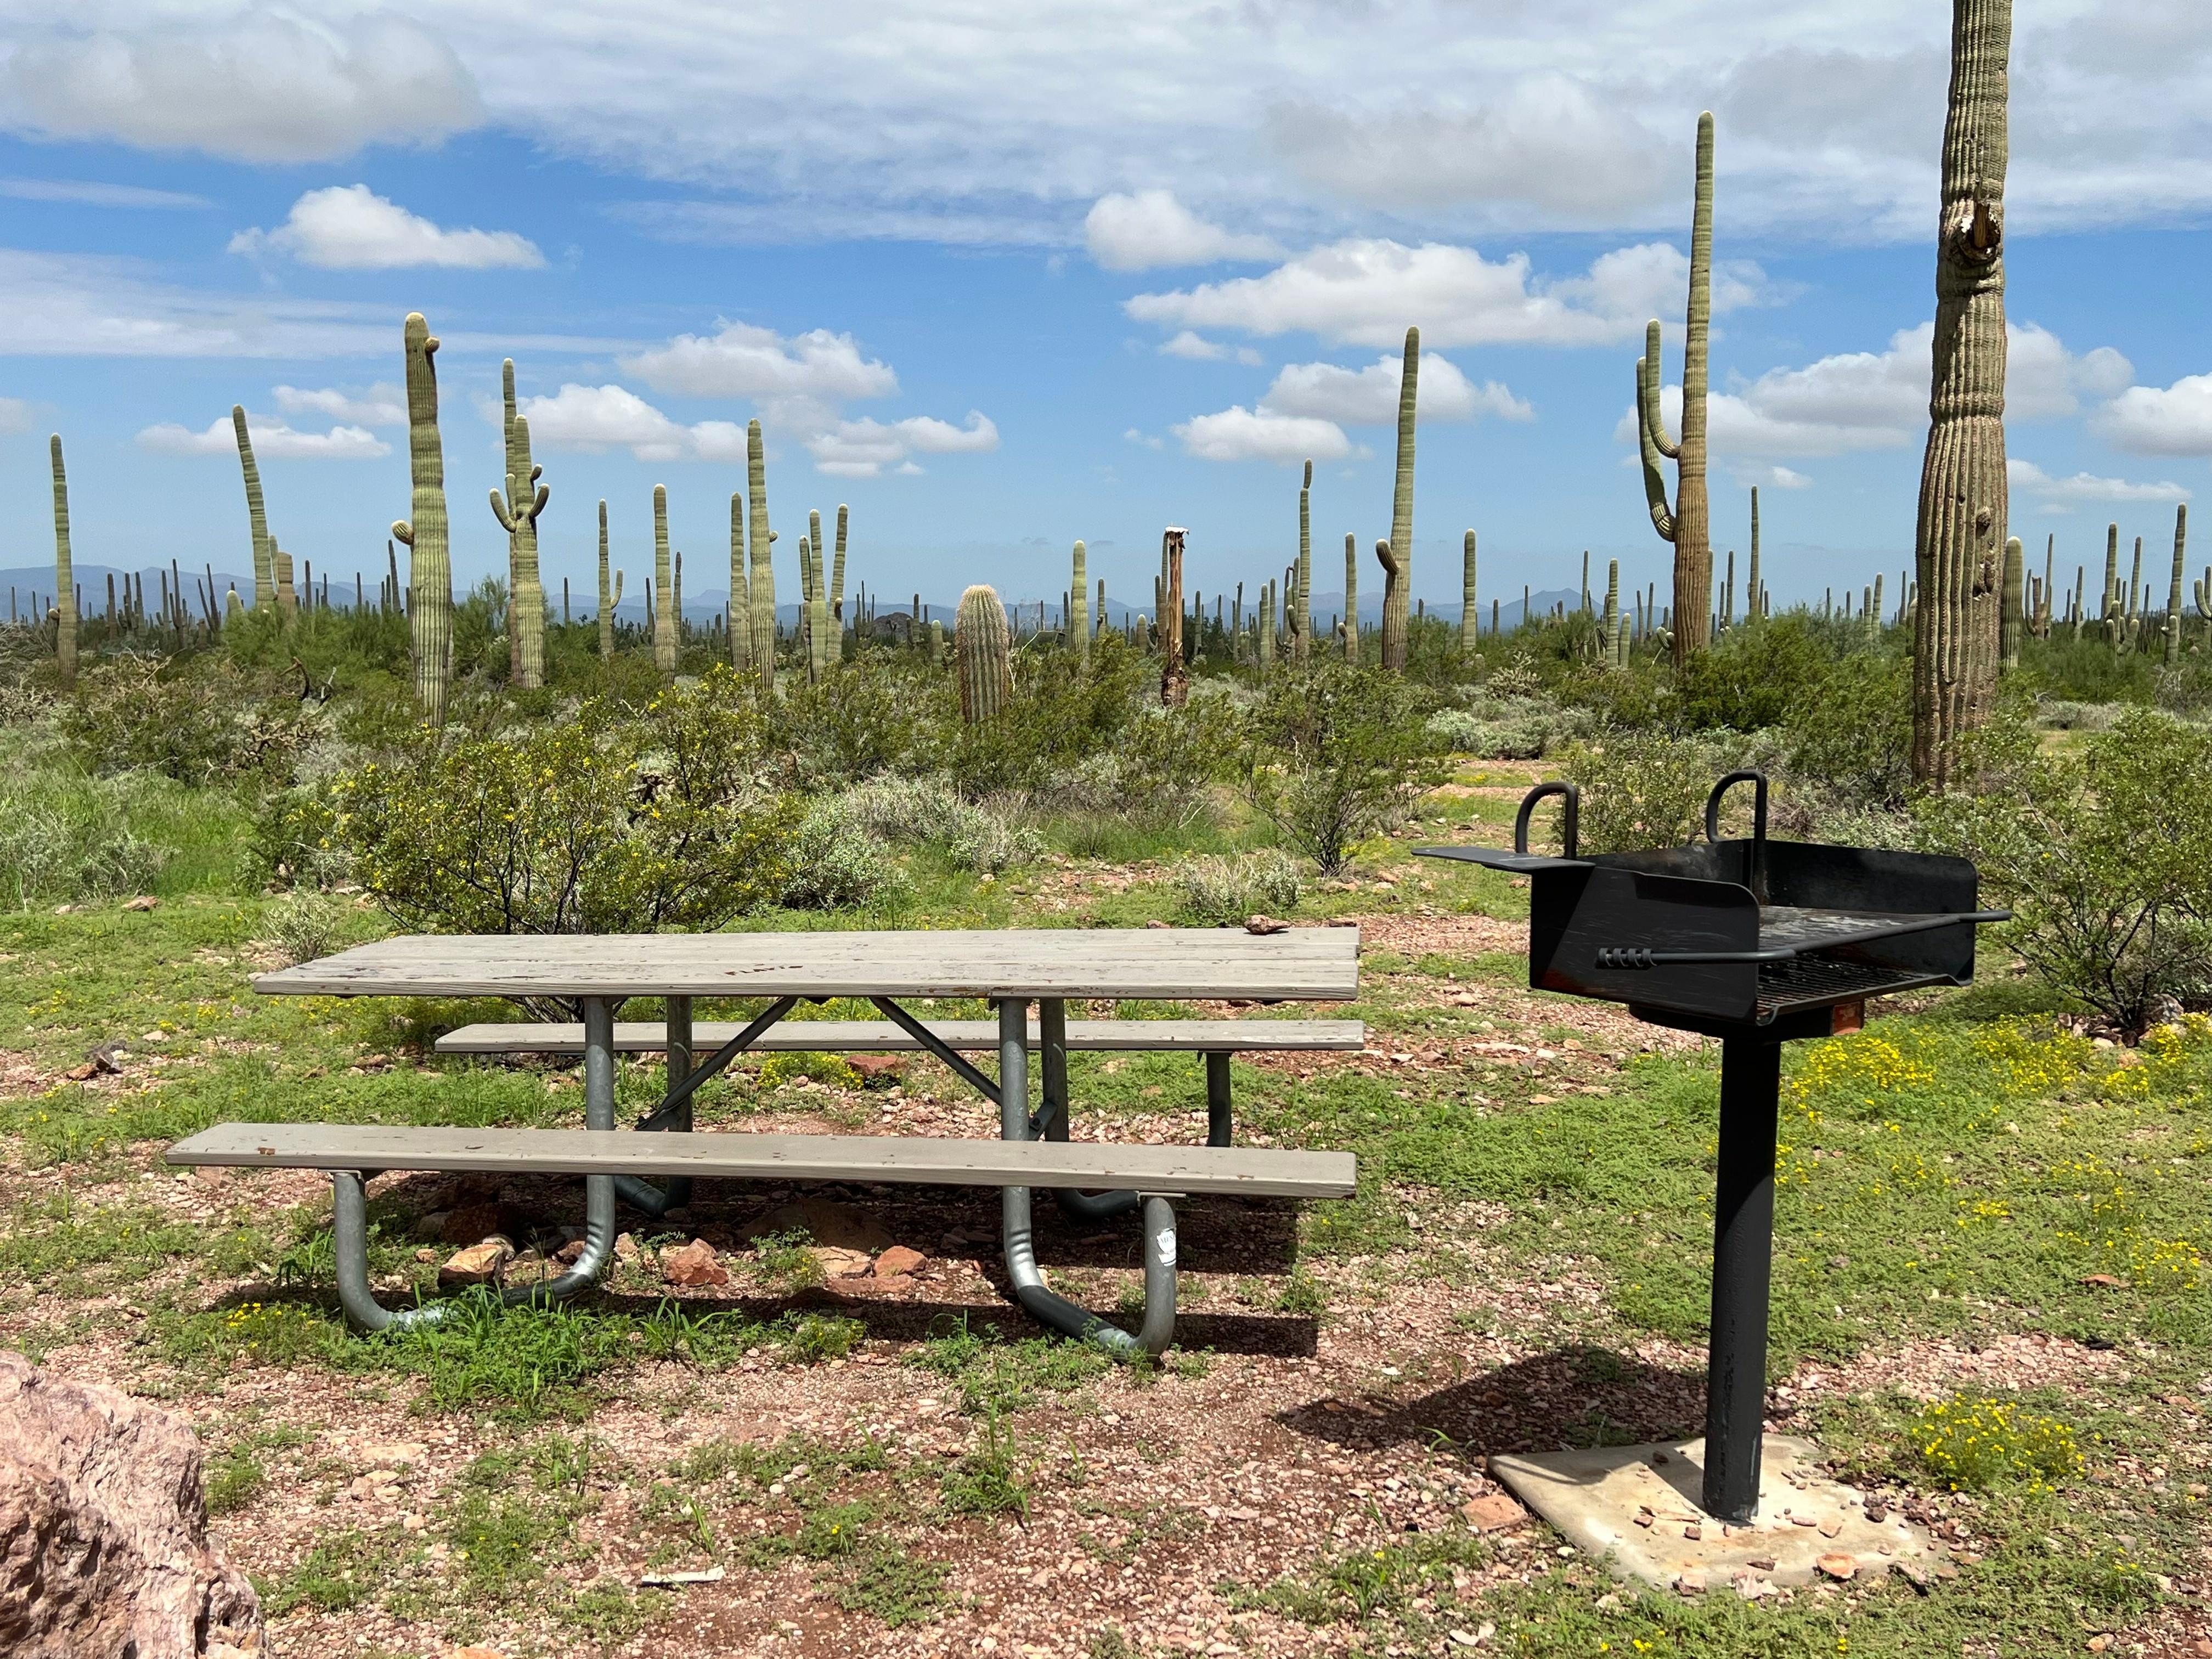 Photo of a picnic table and charcoal grill from a campsite